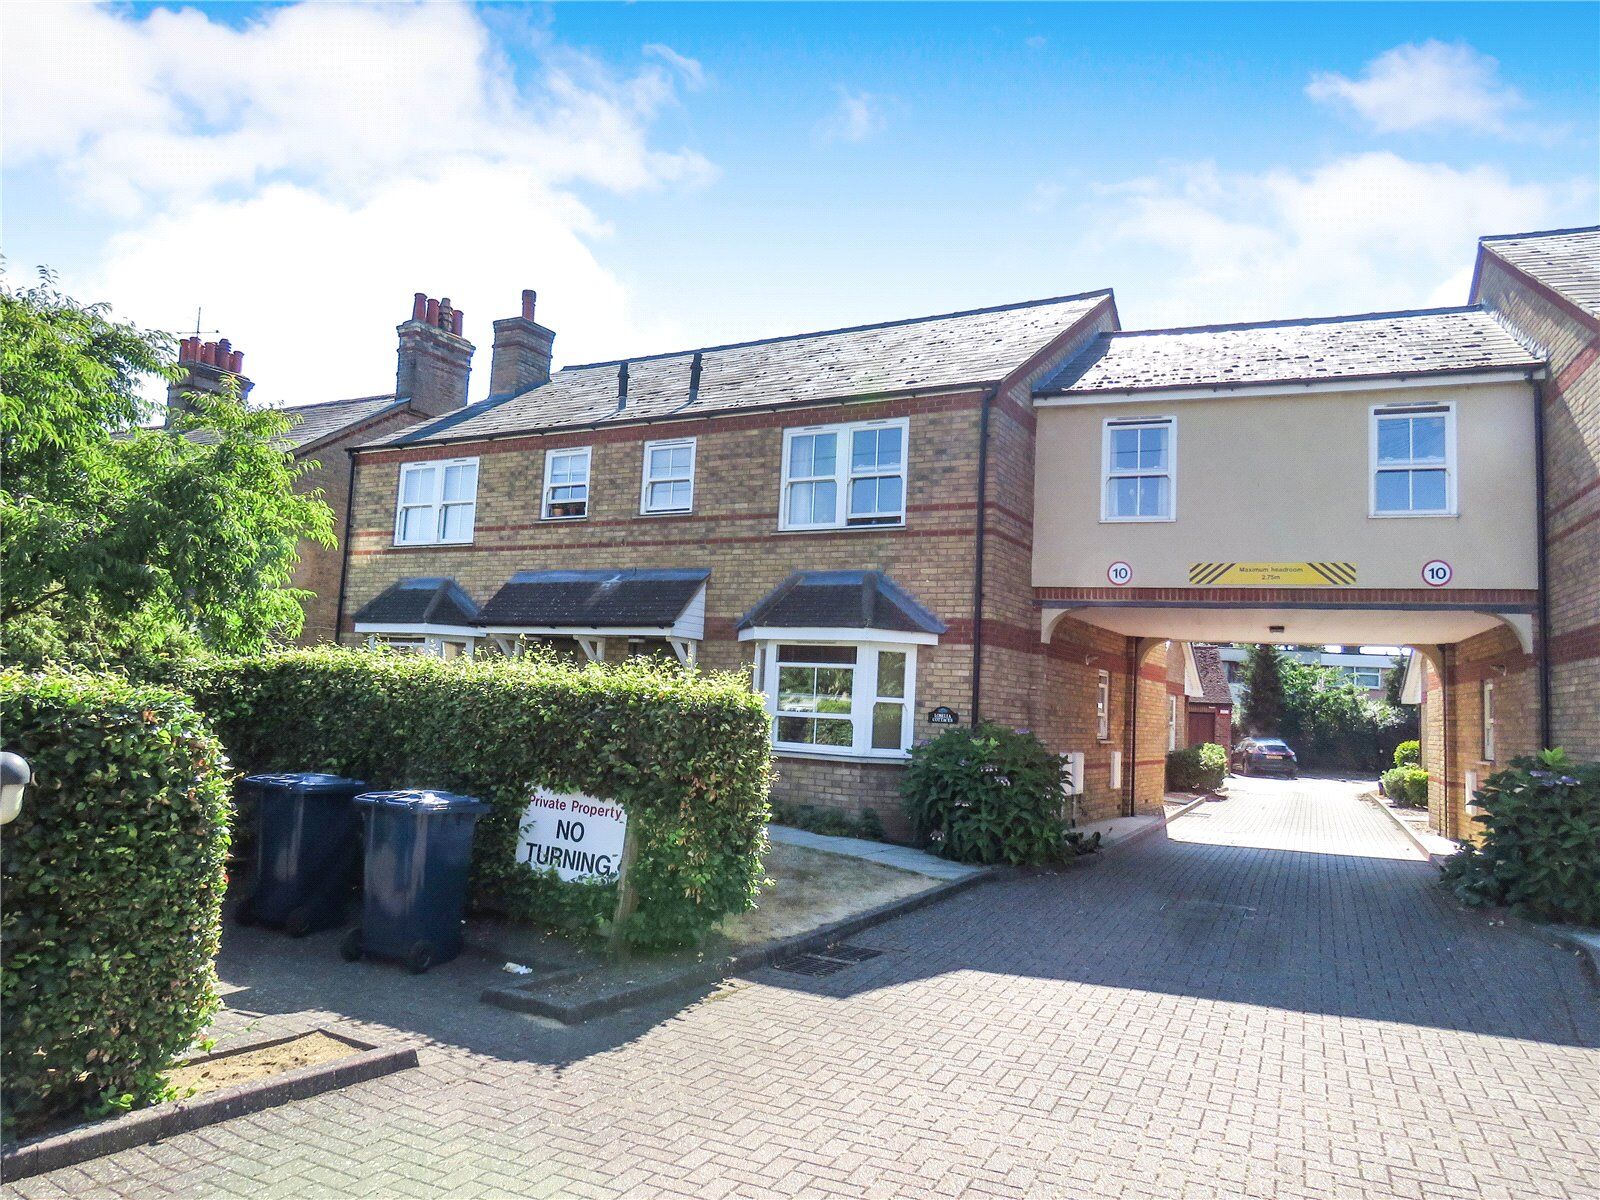 2 bedroom  flat for sale St. Neots Road, Eaton Ford, PE19, main image